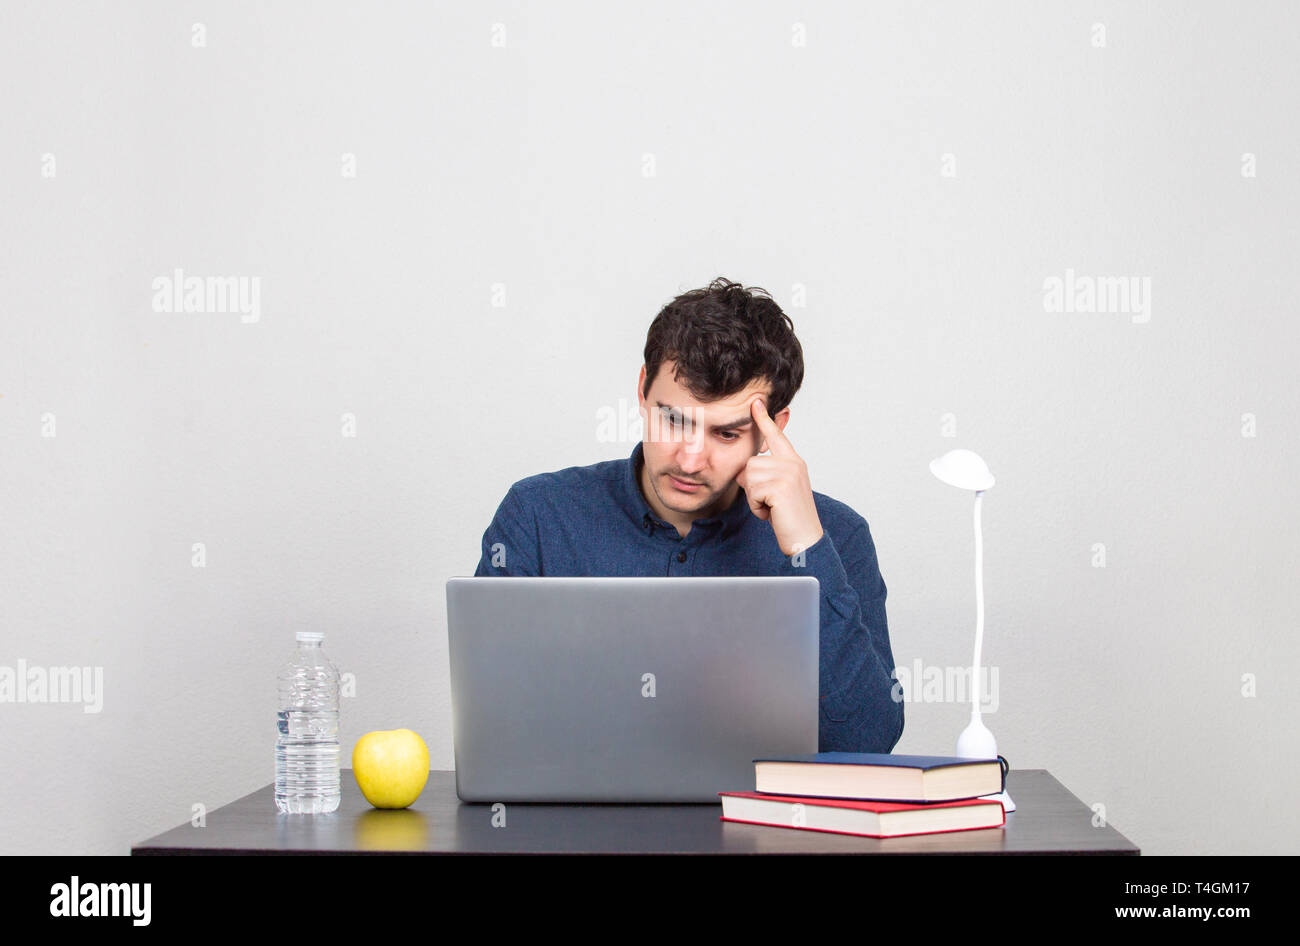 Frustrated and stressed male student thinking intensively looking at a laptop . Tired office worker sitting at desk using computer and doing overtime  Stock Photo